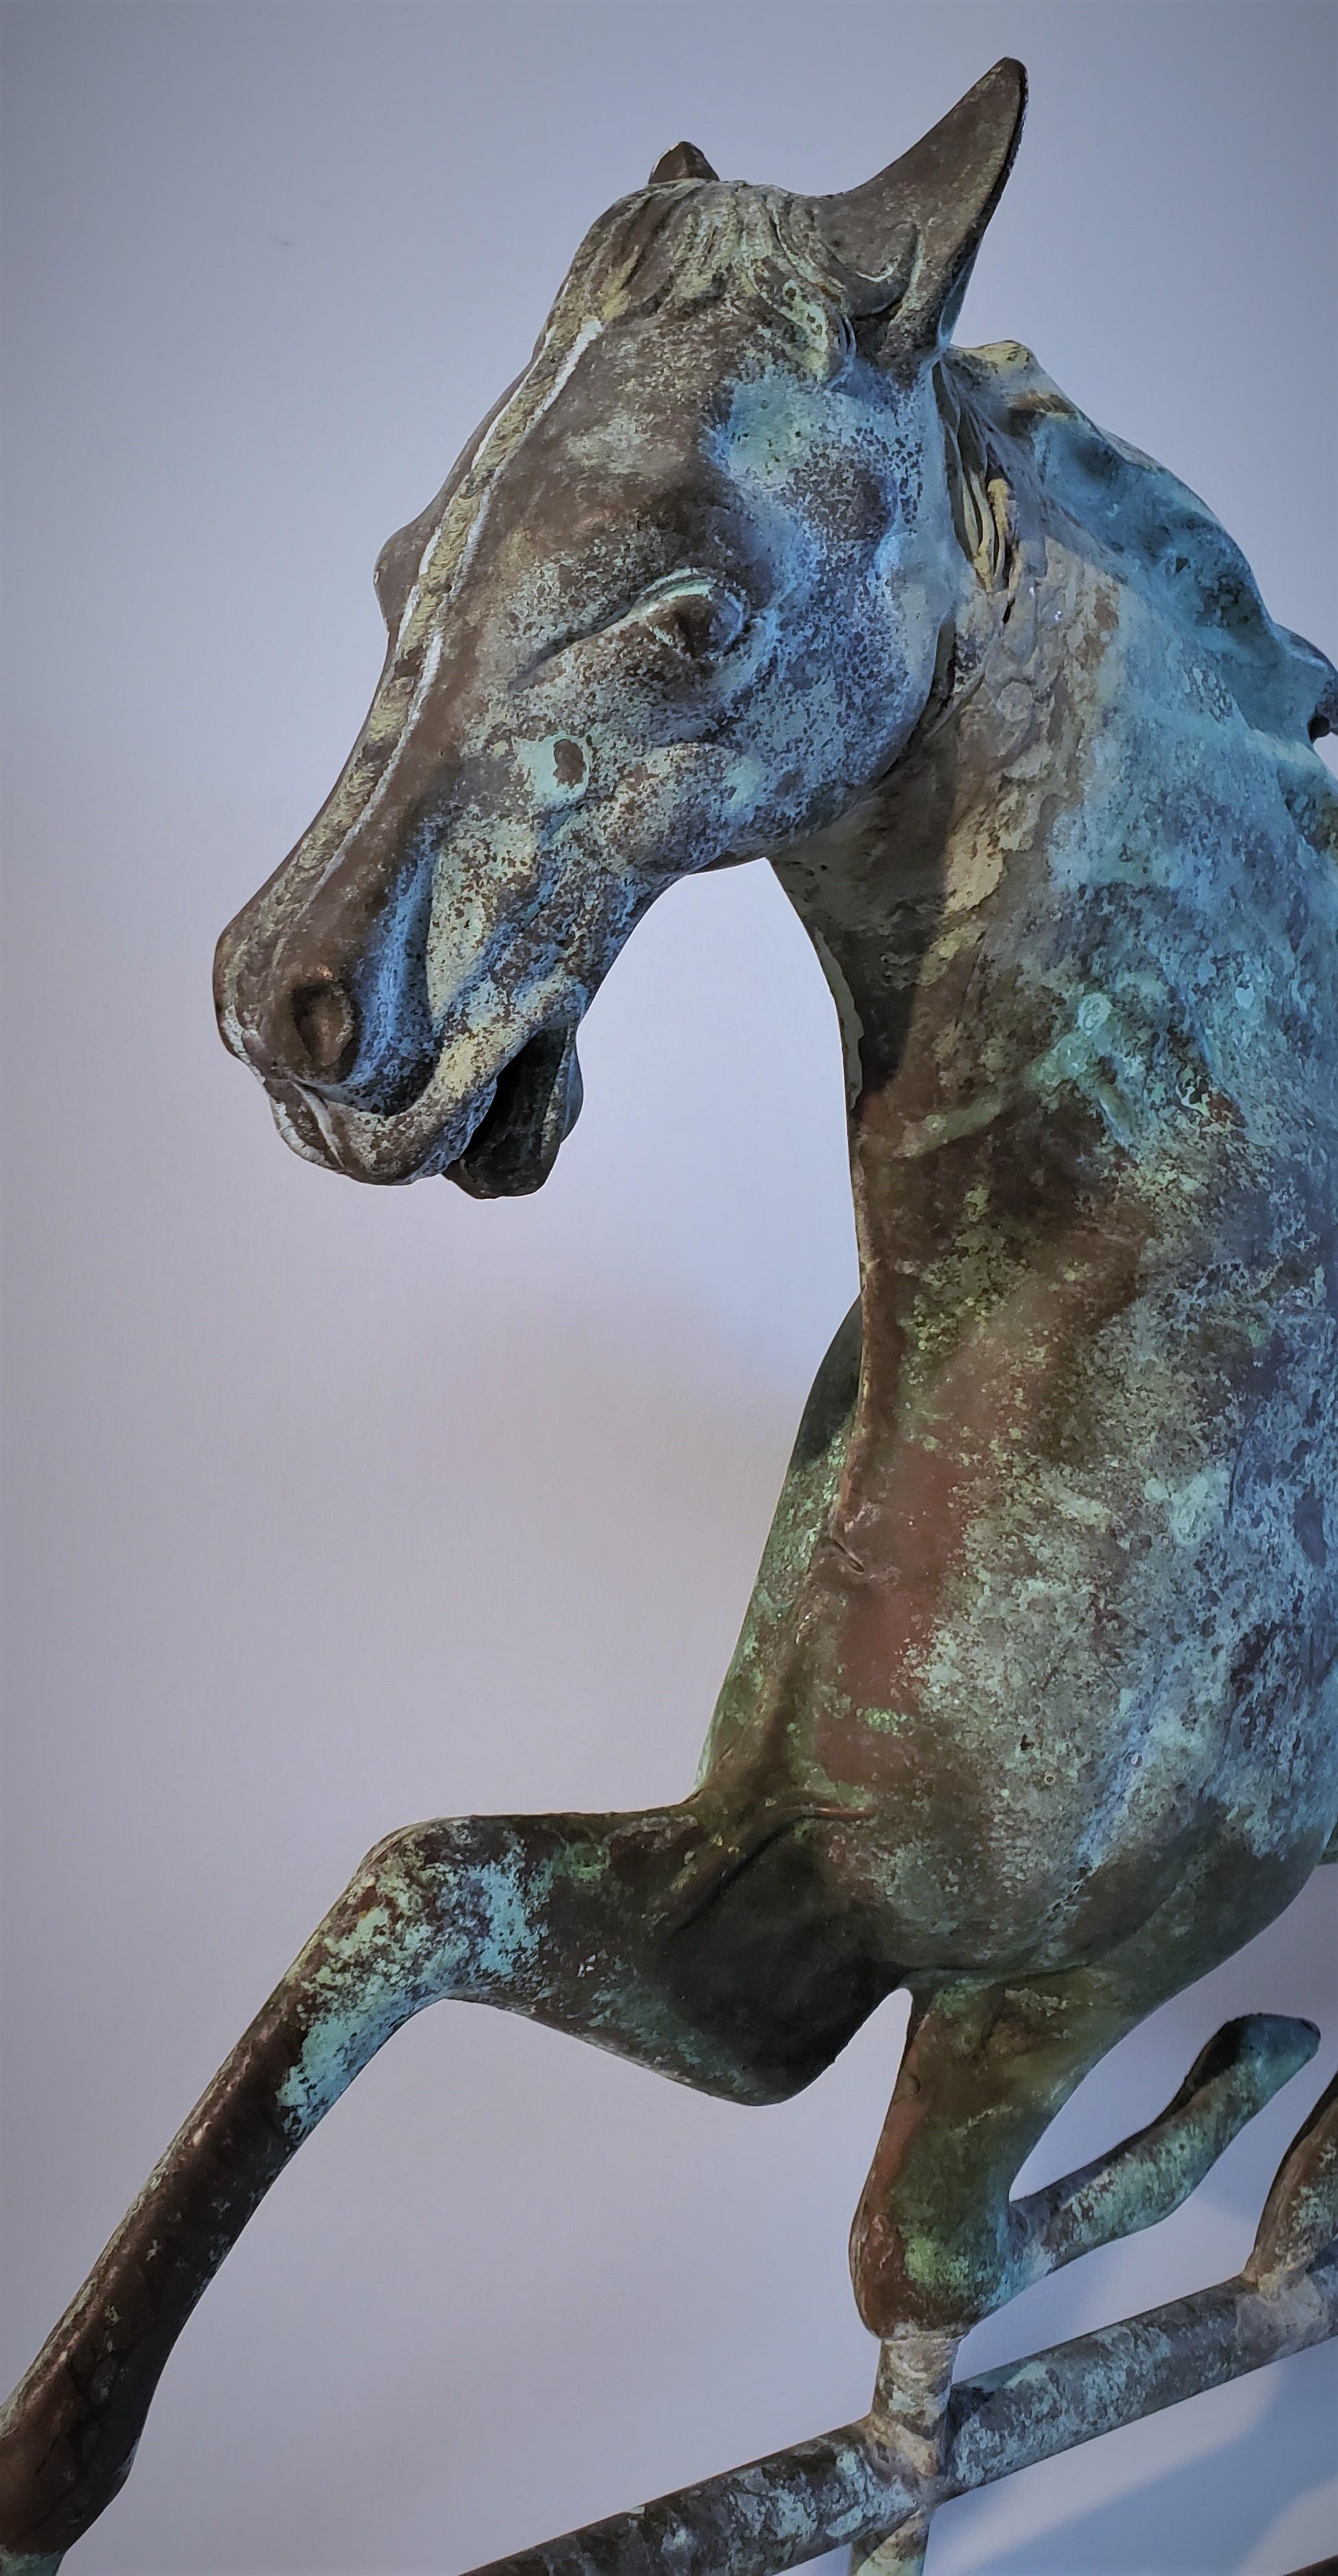 This fantastic full body copper horse weather vane was made from the J.W. Fiske weather vane & garden urn company. This vane has an amazing undisturbed surface & patina. The condition is very good. It is sold with the cast iron stand.